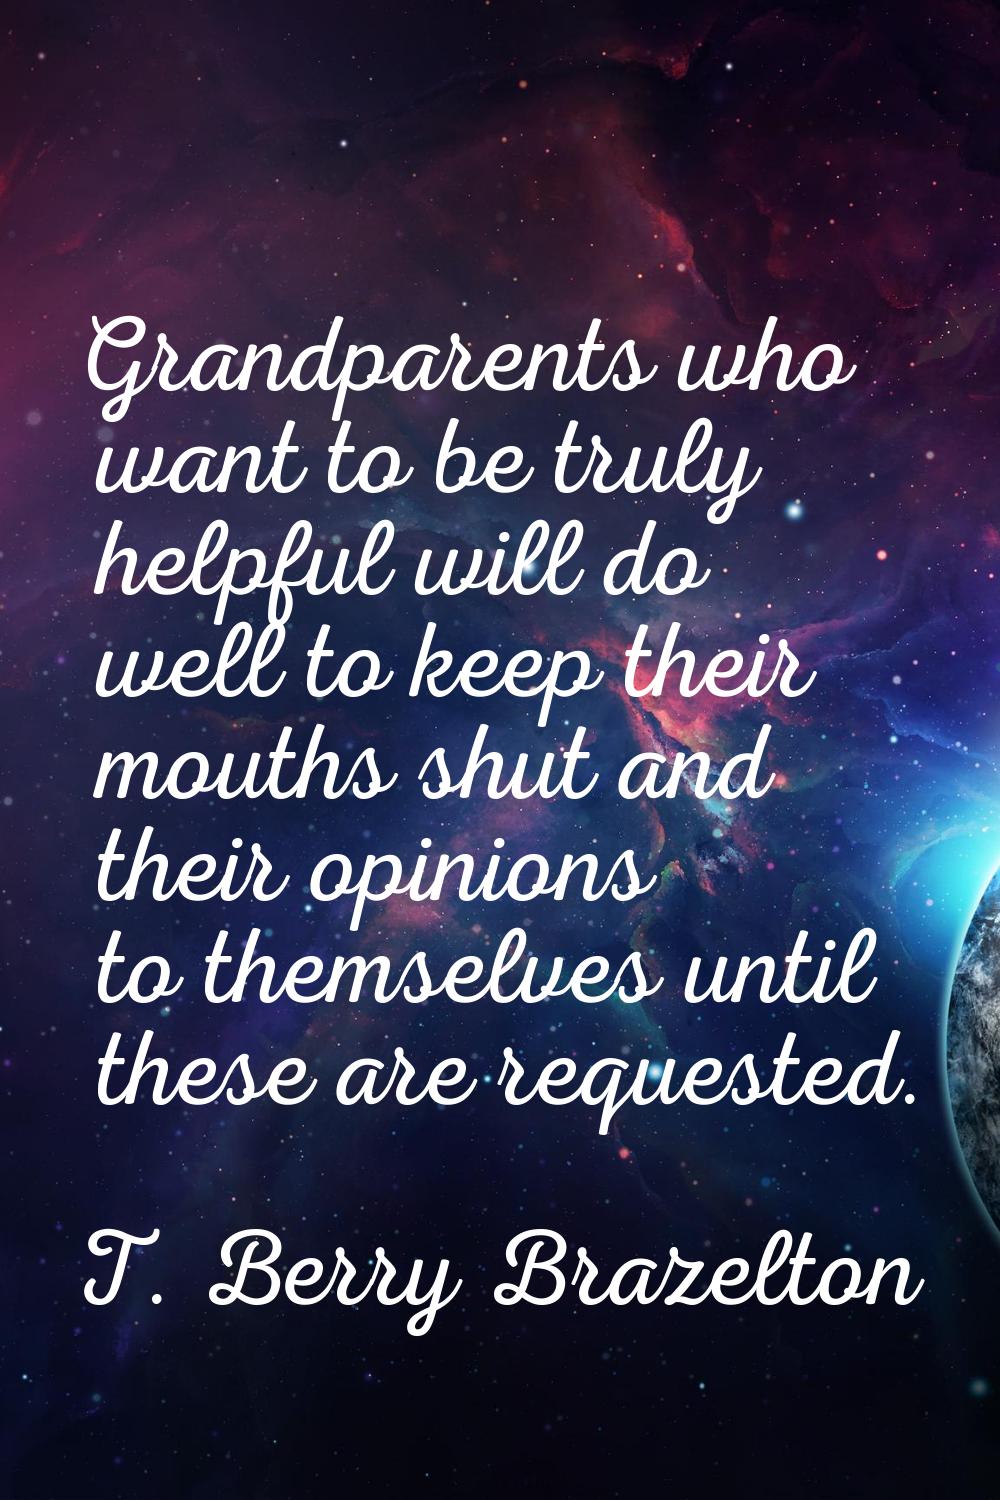 Grandparents who want to be truly helpful will do well to keep their mouths shut and their opinions